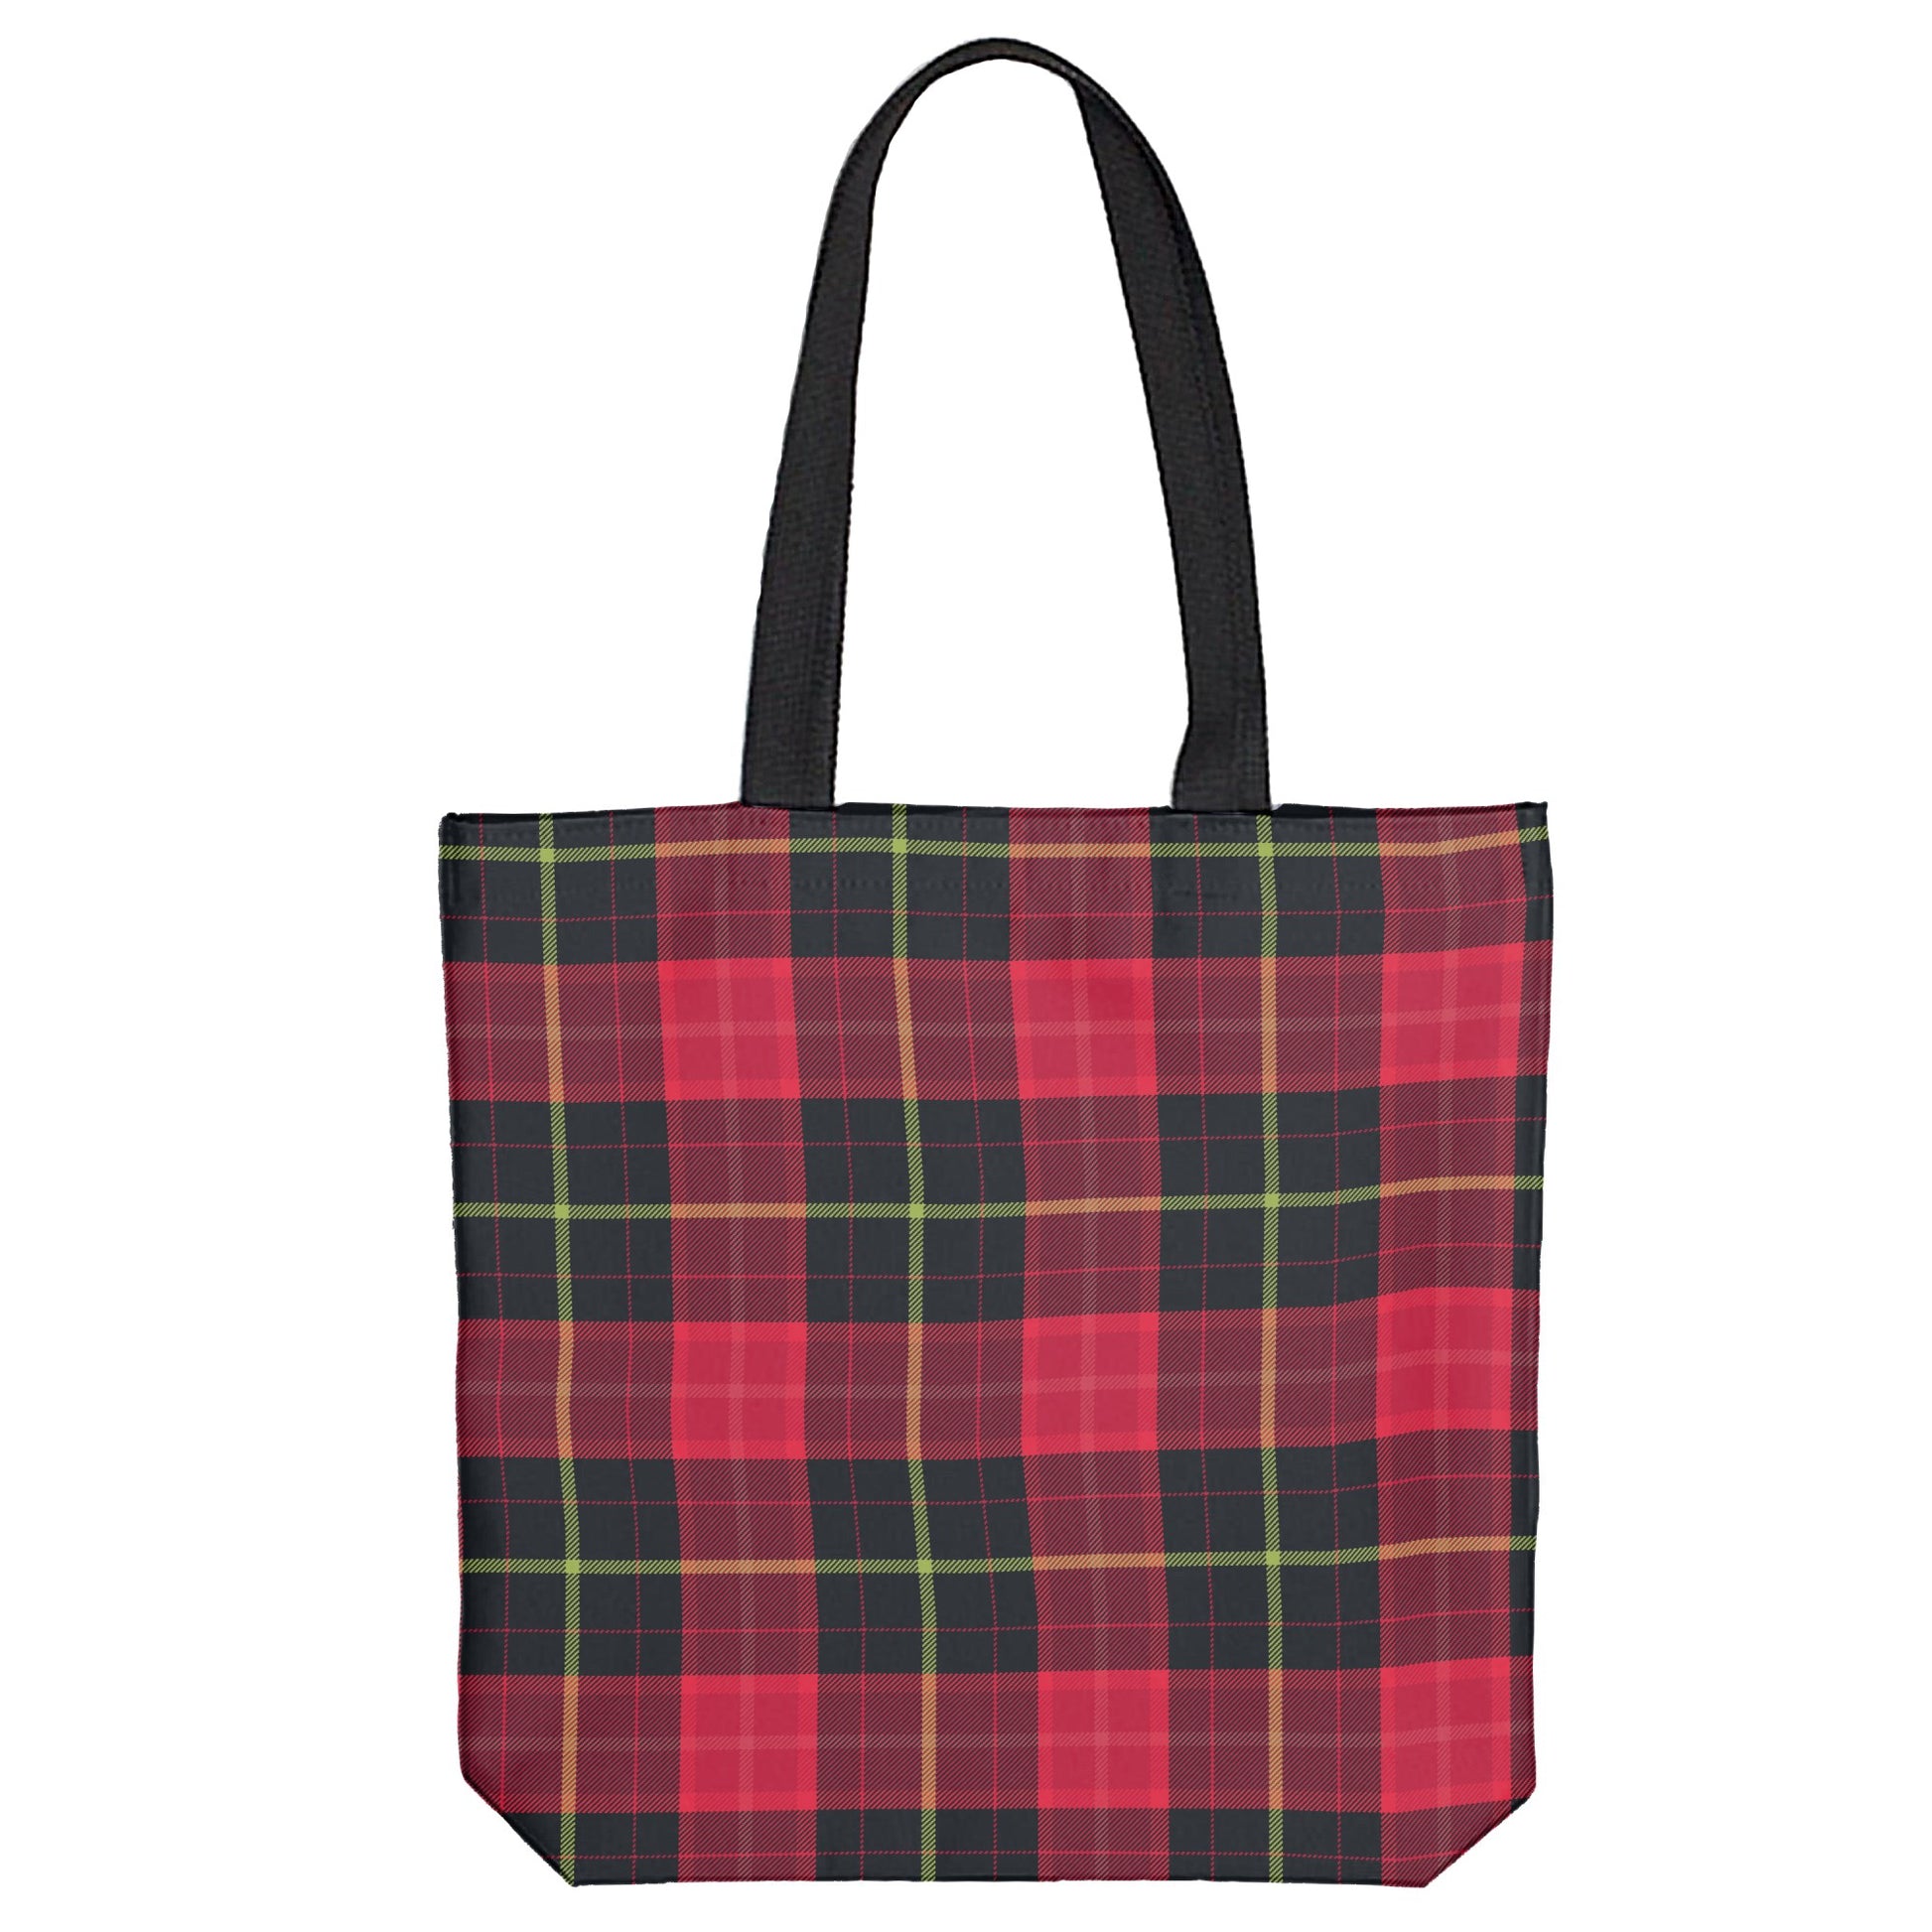 Red Plaid Tote Bag - shades and stripes of green and red with gold or yellow mixed in